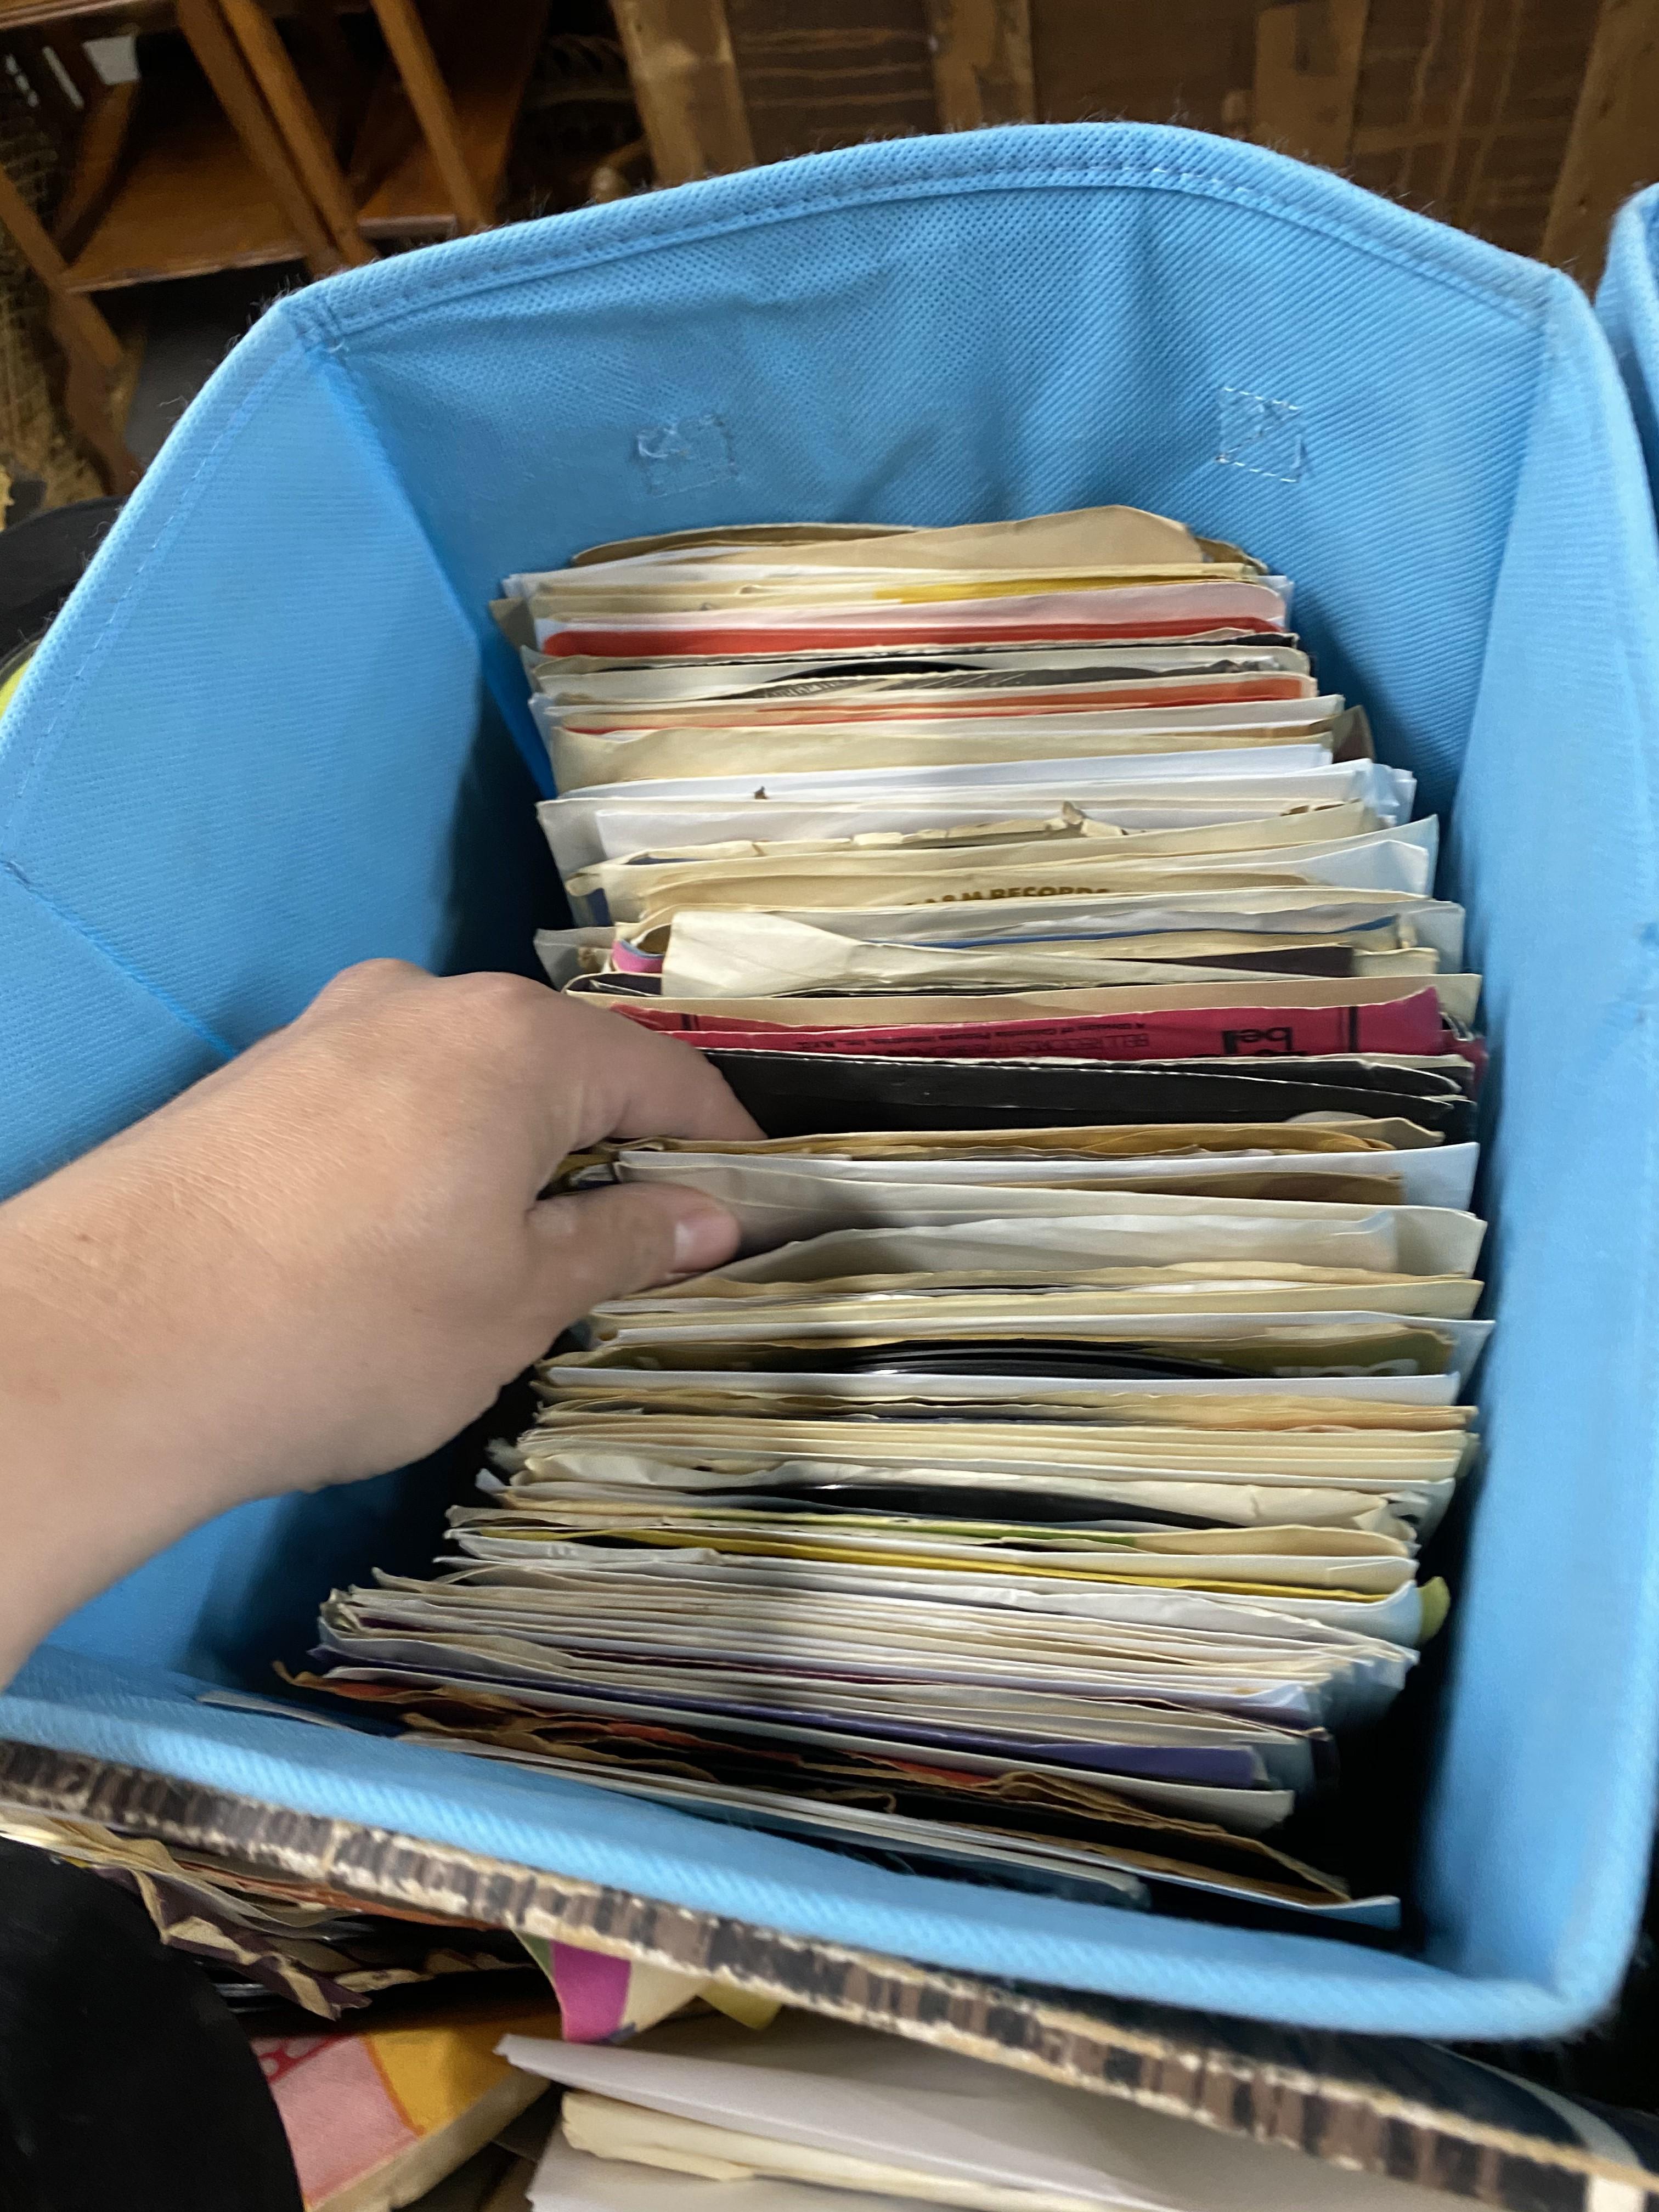 Very Large quantity of 45 records